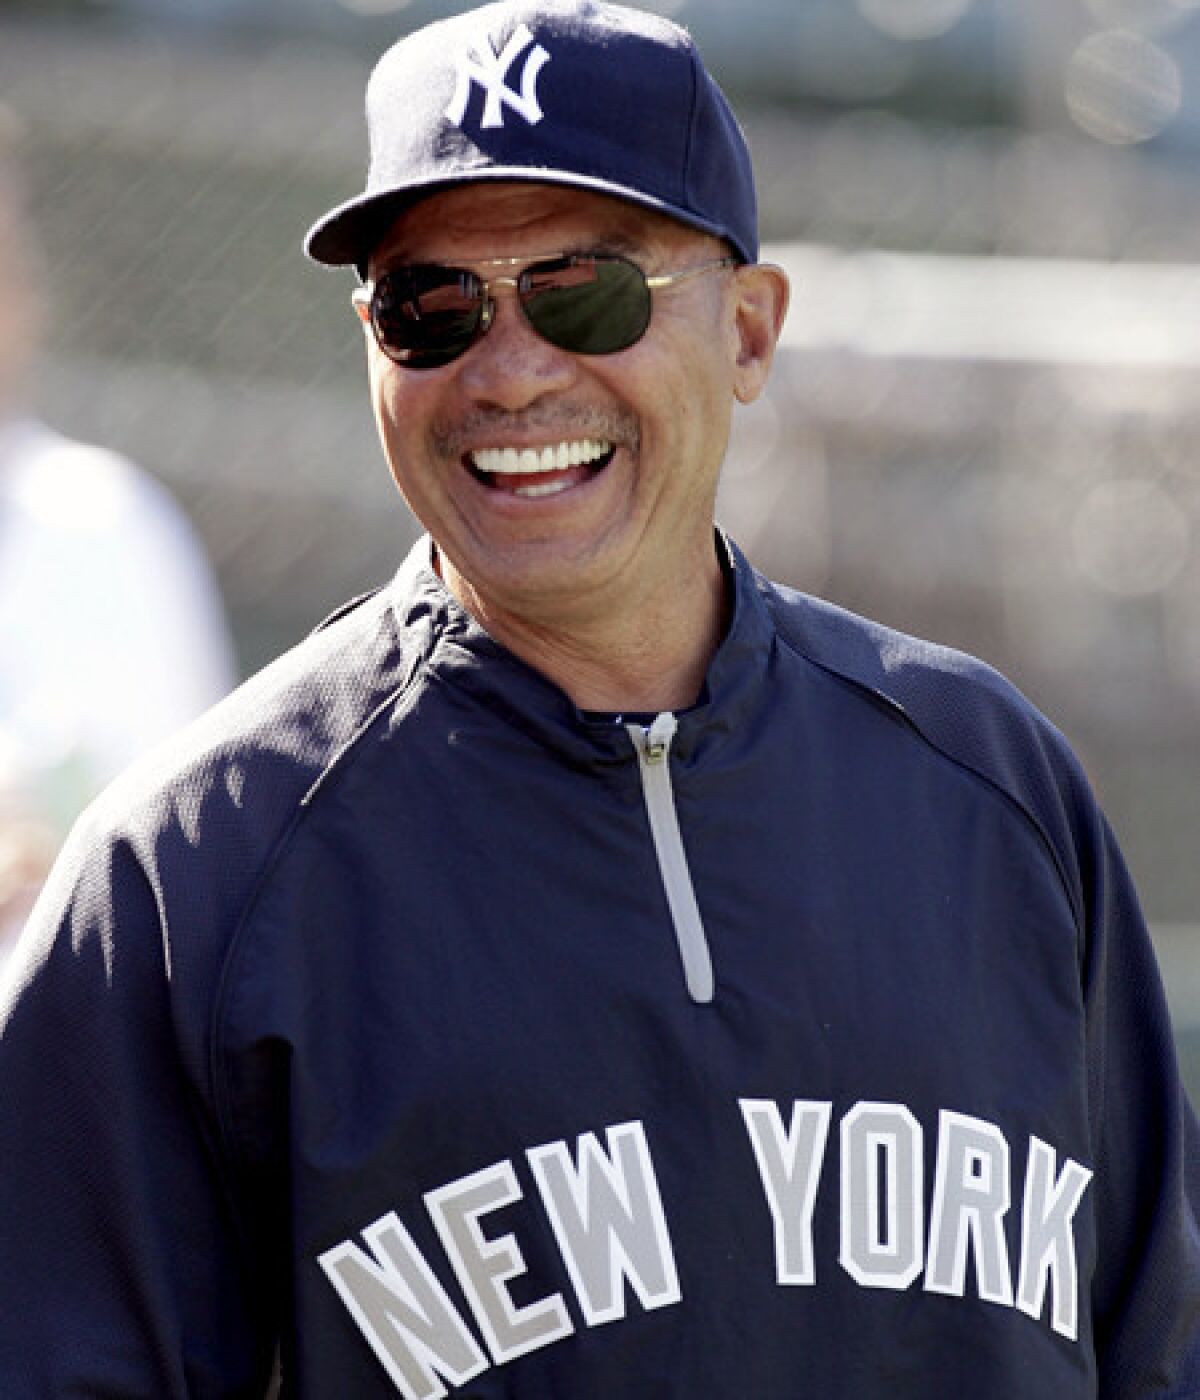 Reggie Jackson is now a special adviser to the Yankees.